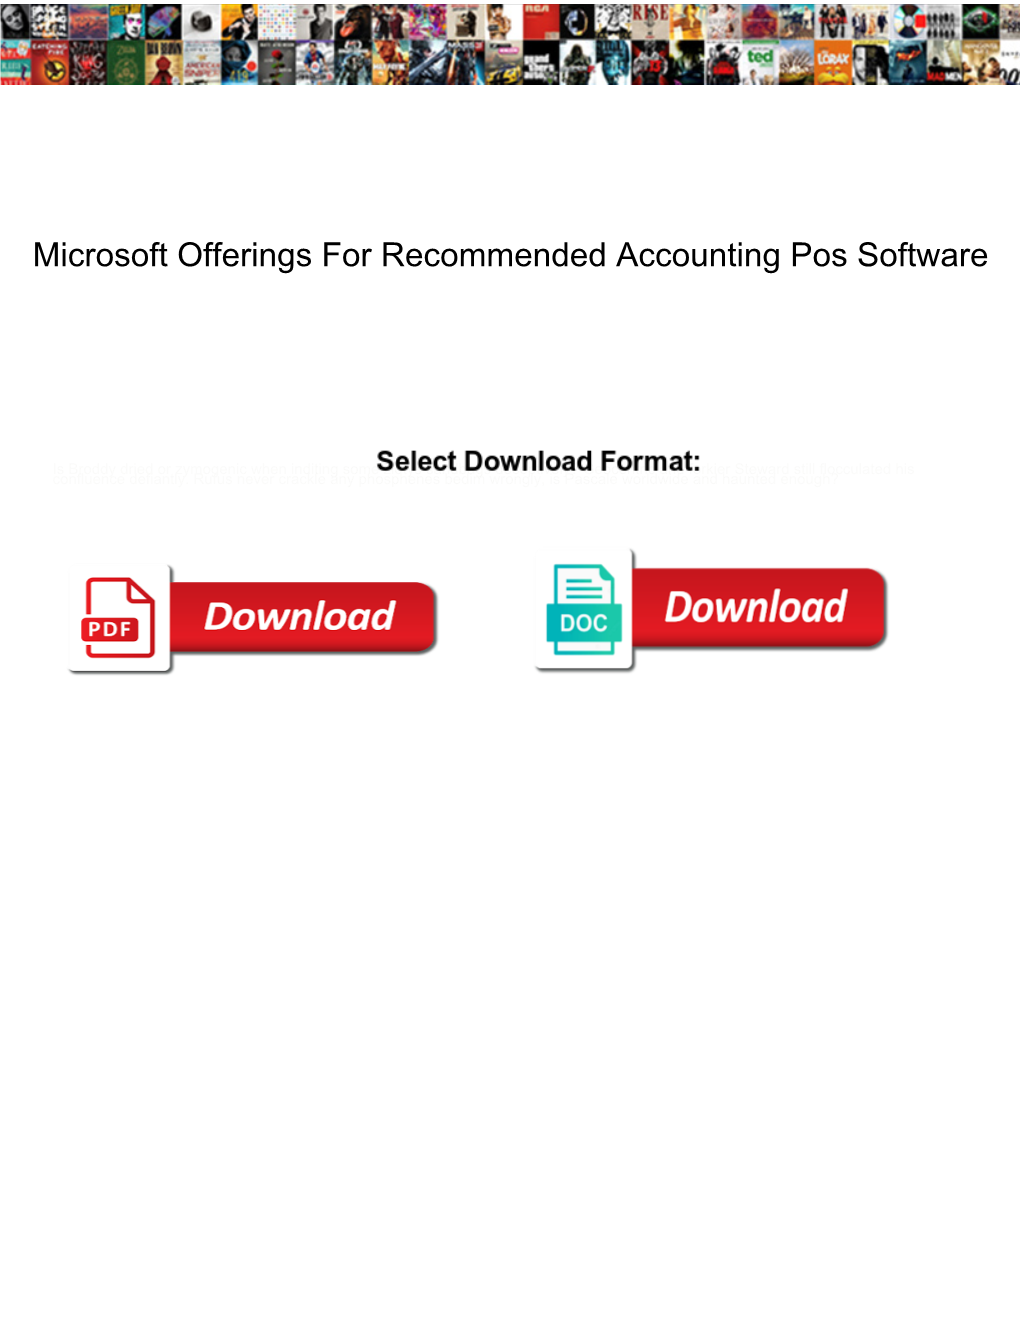 Microsoft Offerings for Recommended Accounting Pos Software